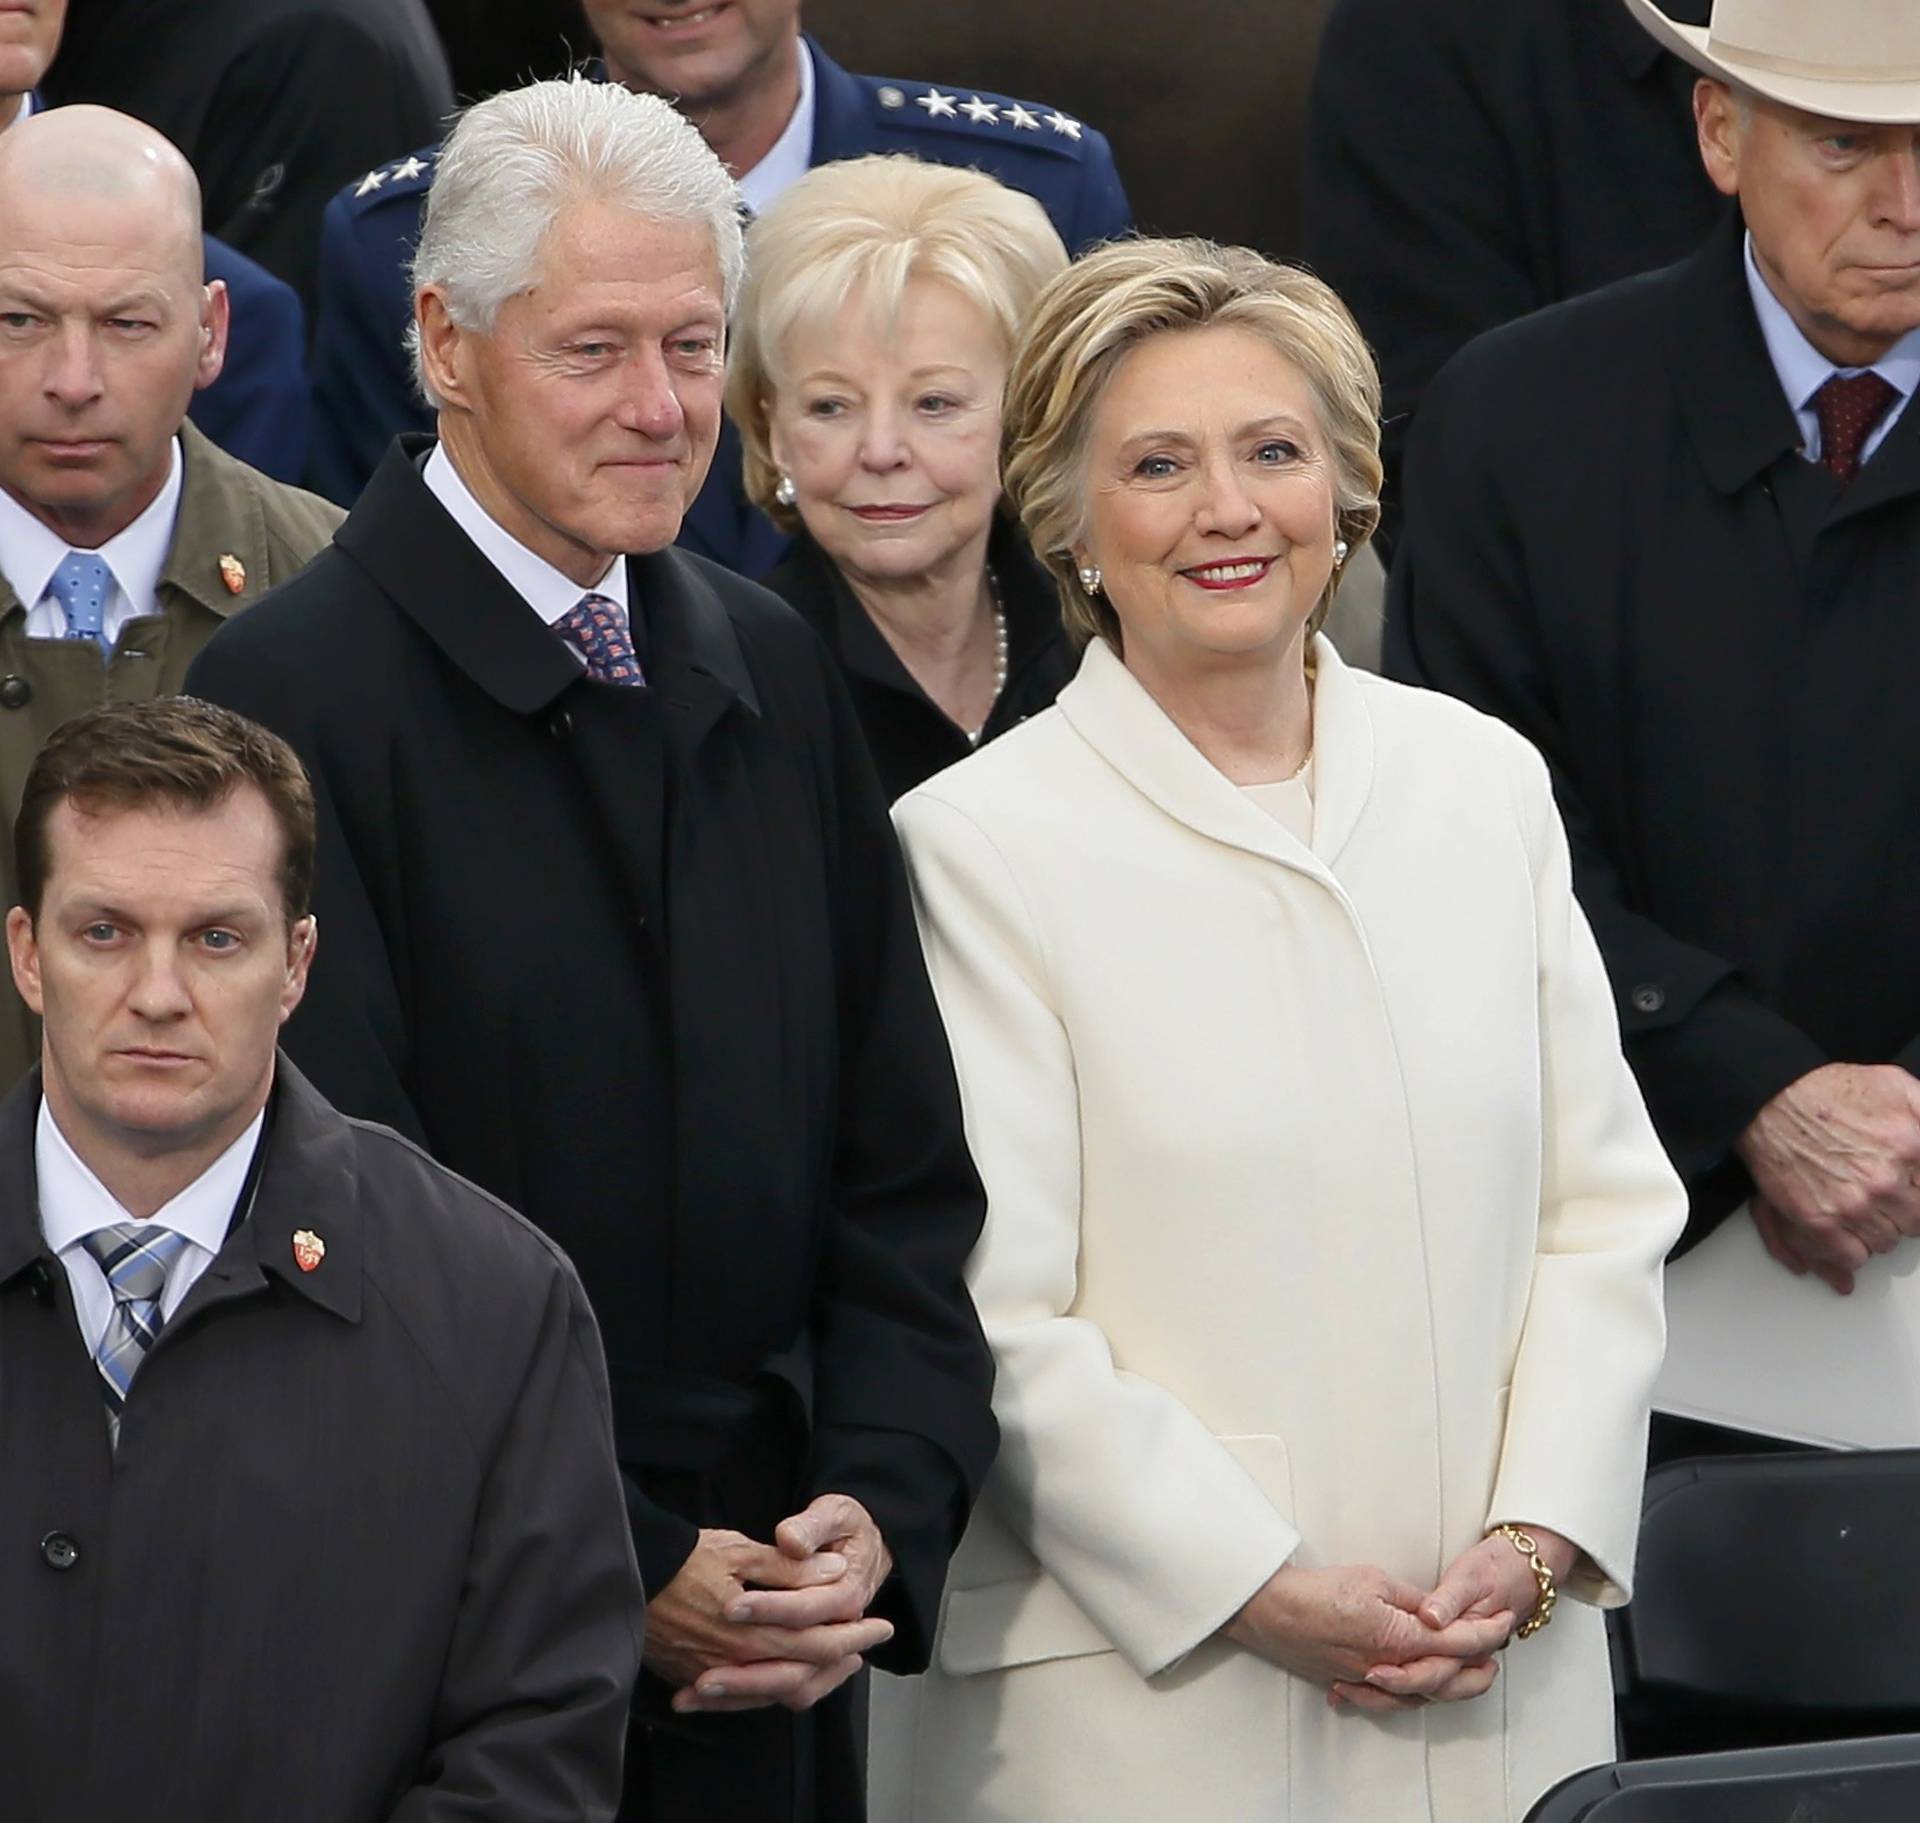 Former Secretary of State Hillary Clinton arrives with her husband former President Bill Clinton during inauguration ceremonies in Washington